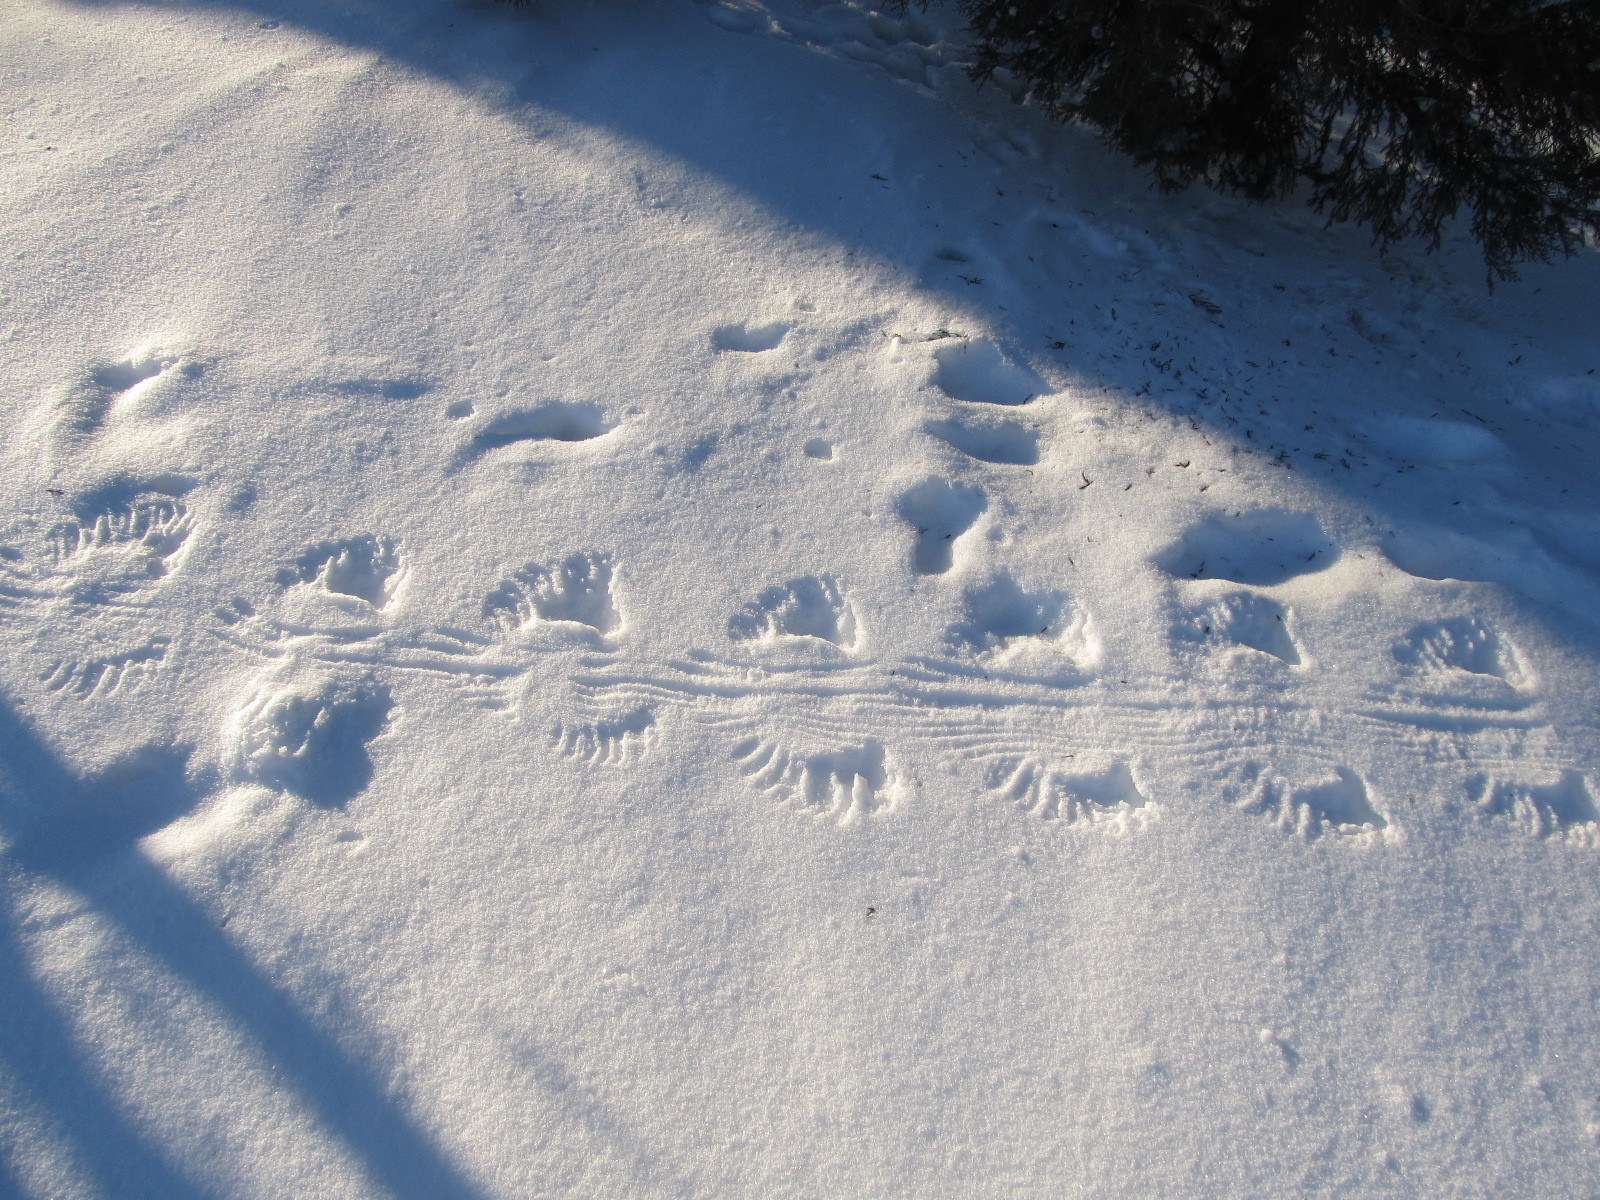 animal-tracks-in-snow-4-of-4-438013-ask-extension